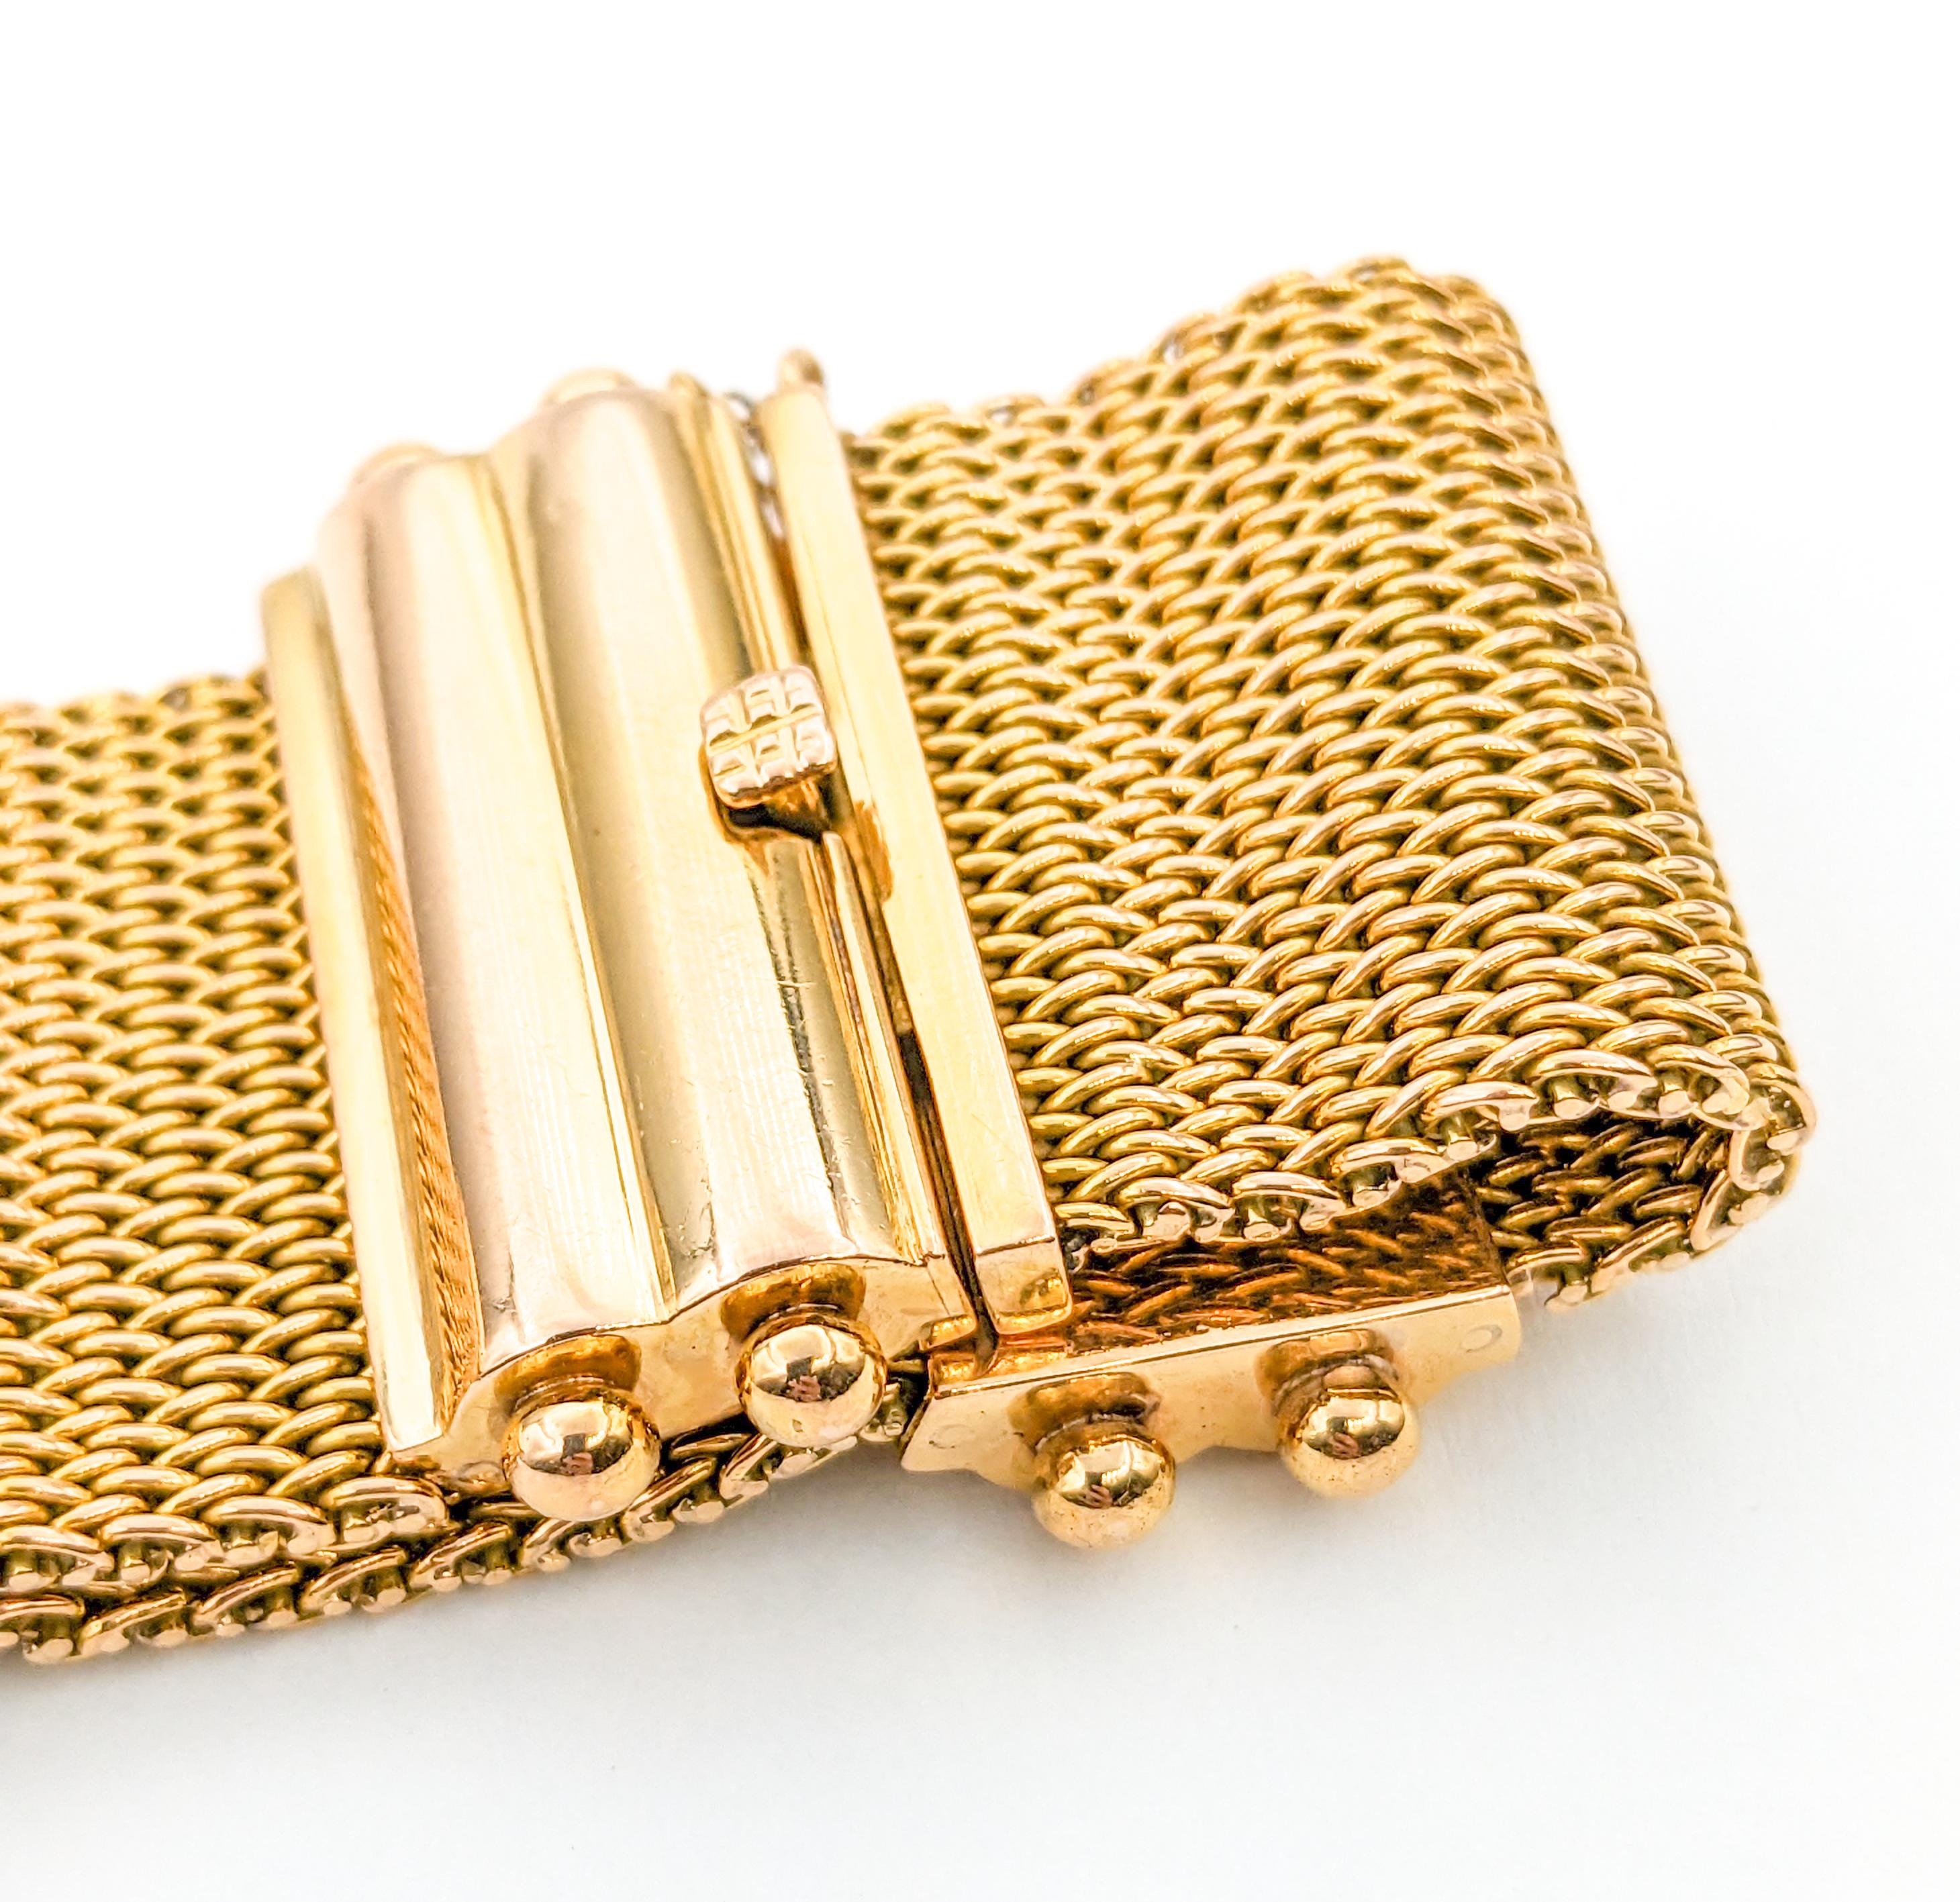 Antique Wide Mesh Bracelet In 18K Yellow Gold In Excellent Condition For Sale In Bloomington, MN